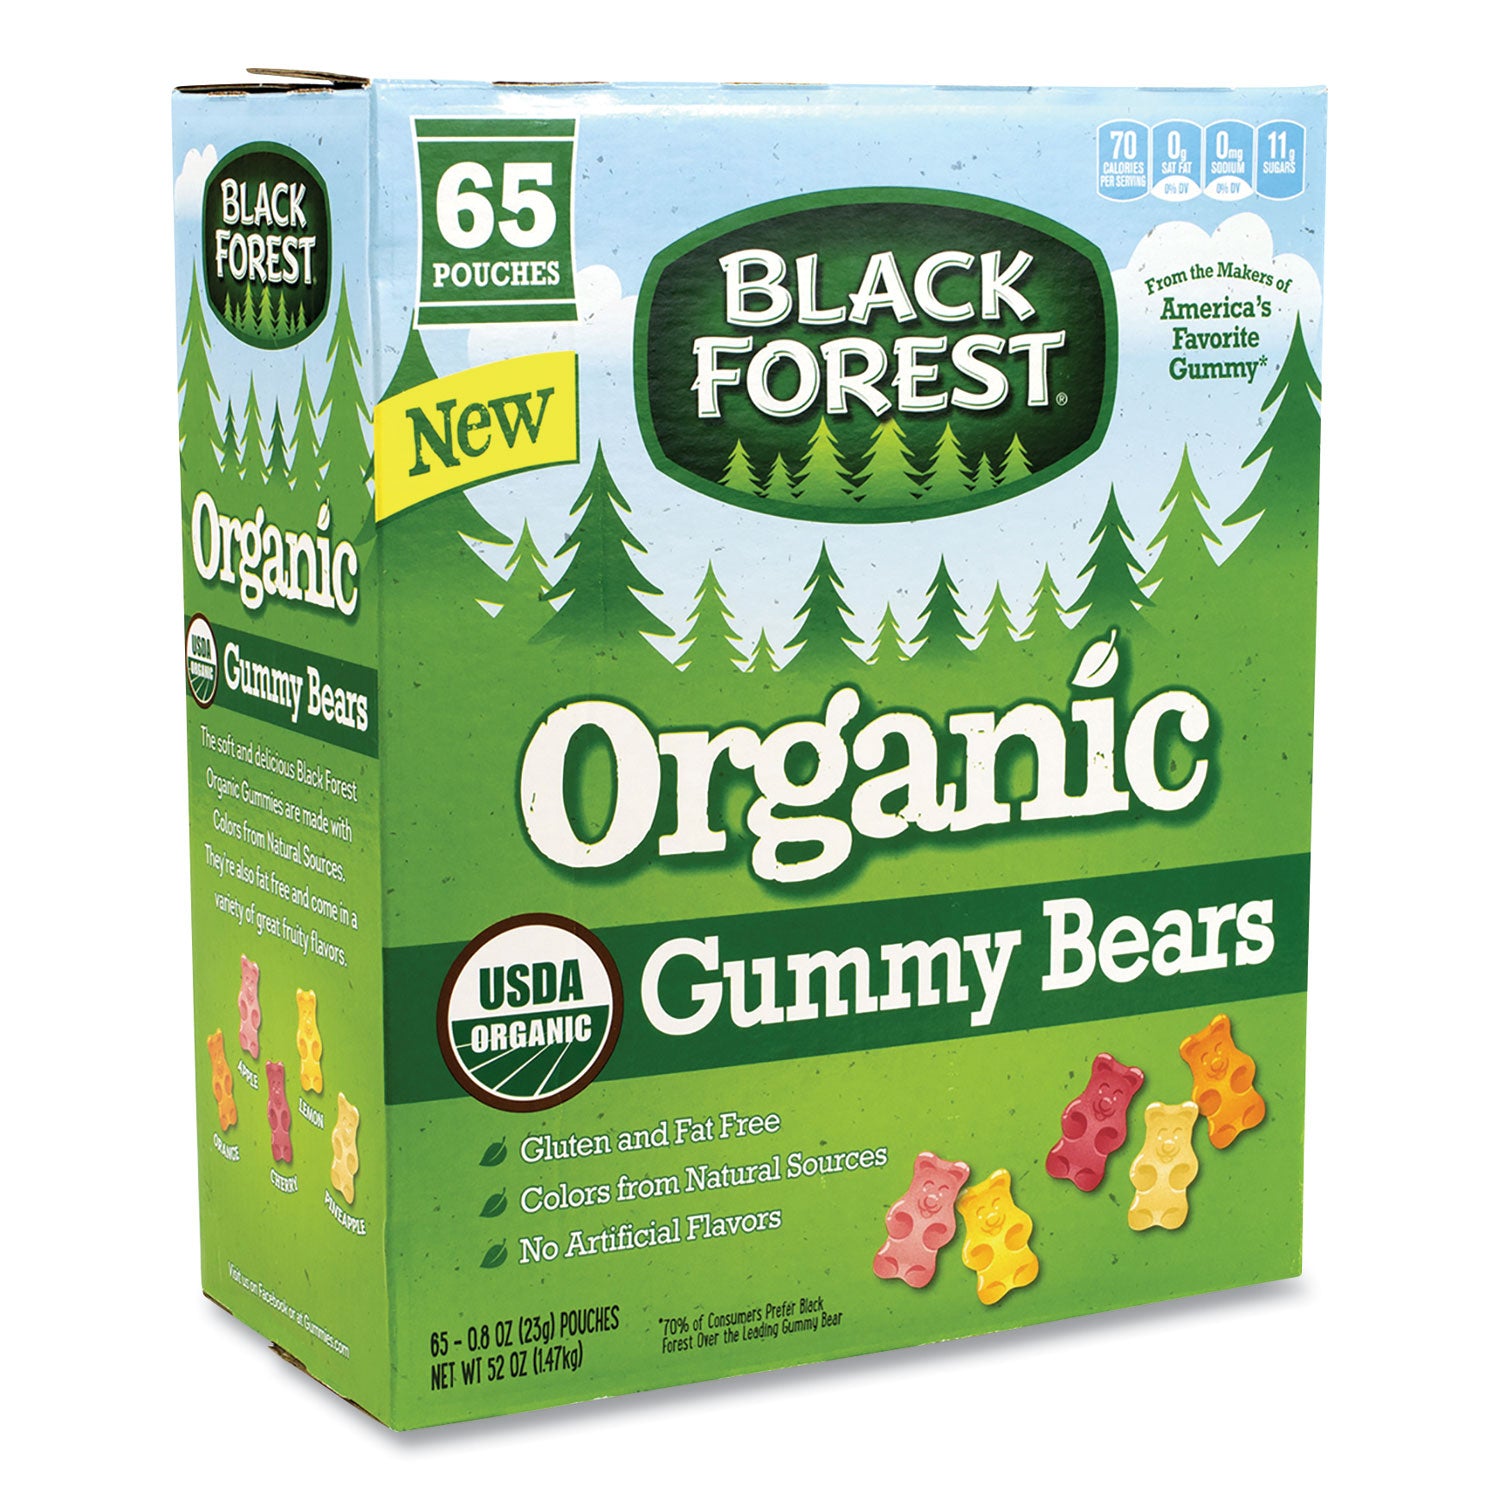 organic-gummy-bears-08-oz-pouch-65-pouches-carton-ships-in-1-3-business-days_grr22000556 - 1